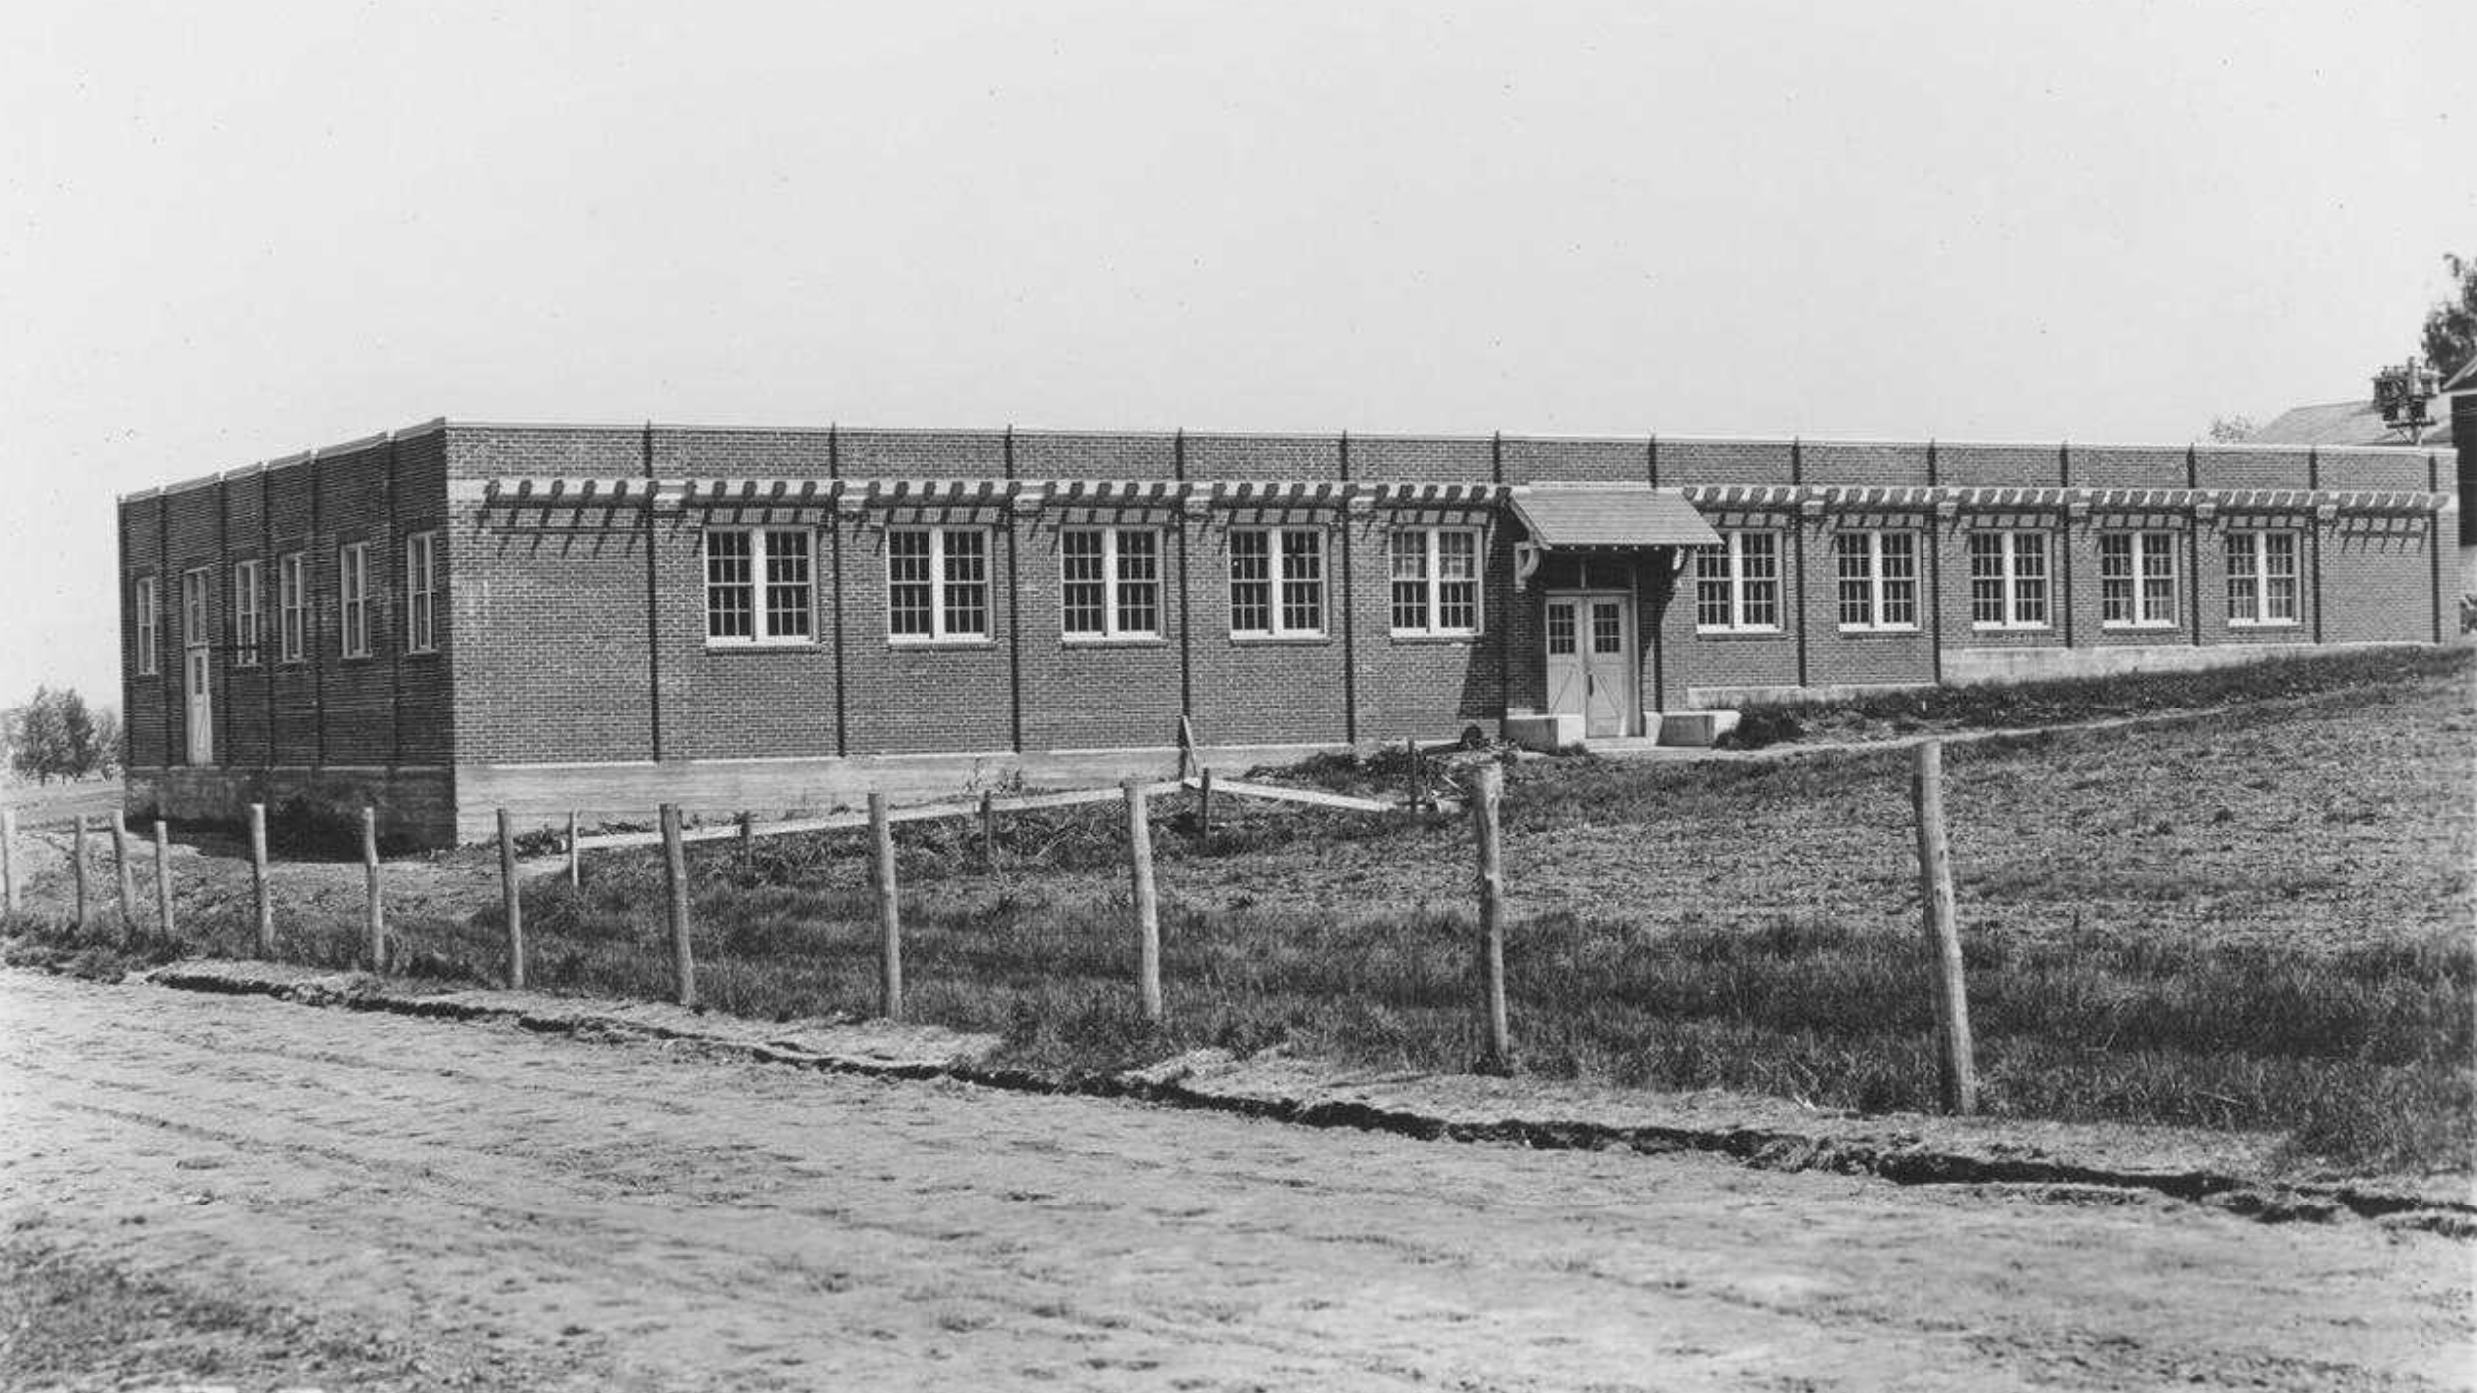 Exterior of agricultural engineering building 1918